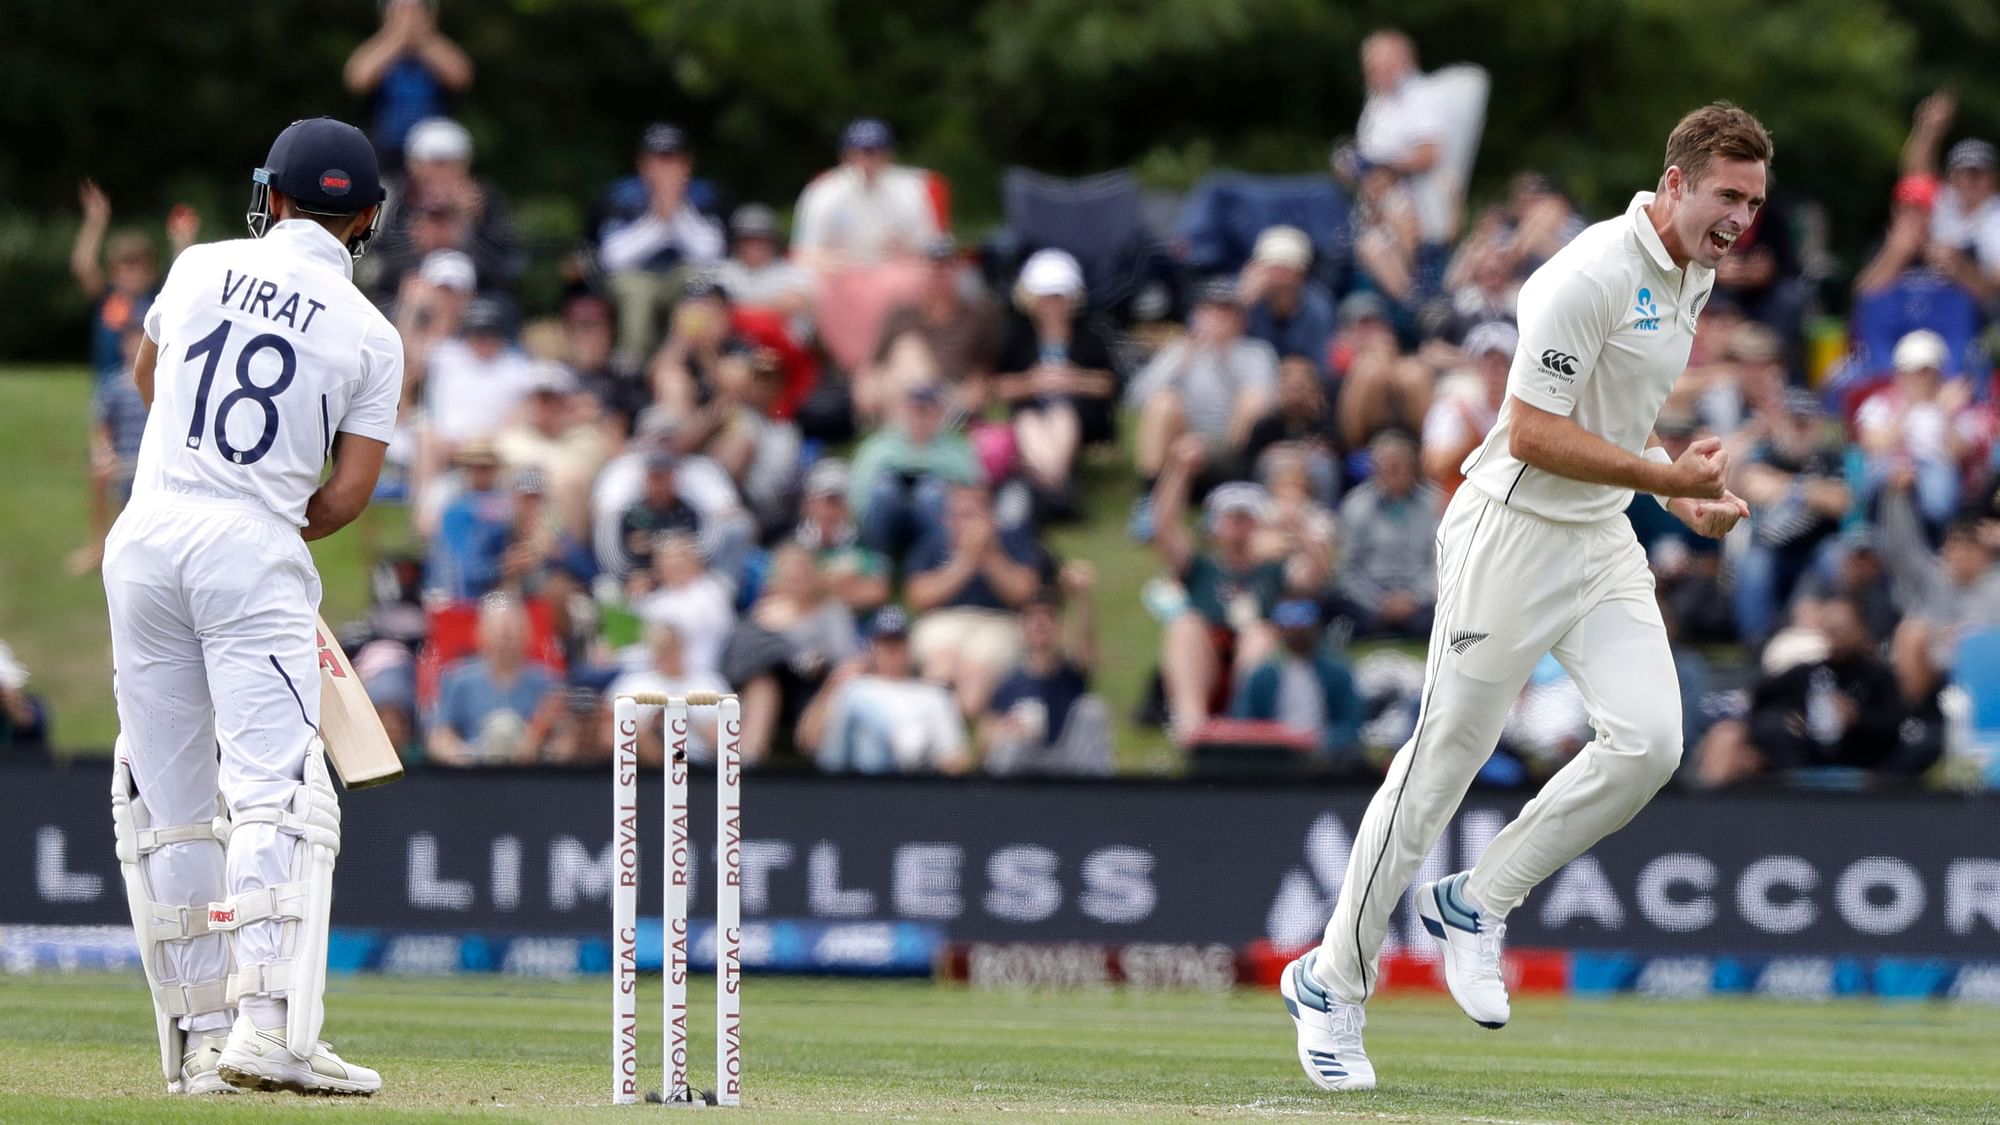 New Zealand’s Tim Southee, right, celebrates after dismissing India’s Virat Kohli, left, during play on day one of the second cricket test between New Zealand and India at Hagley Oval in Christchurch, New Zealand.